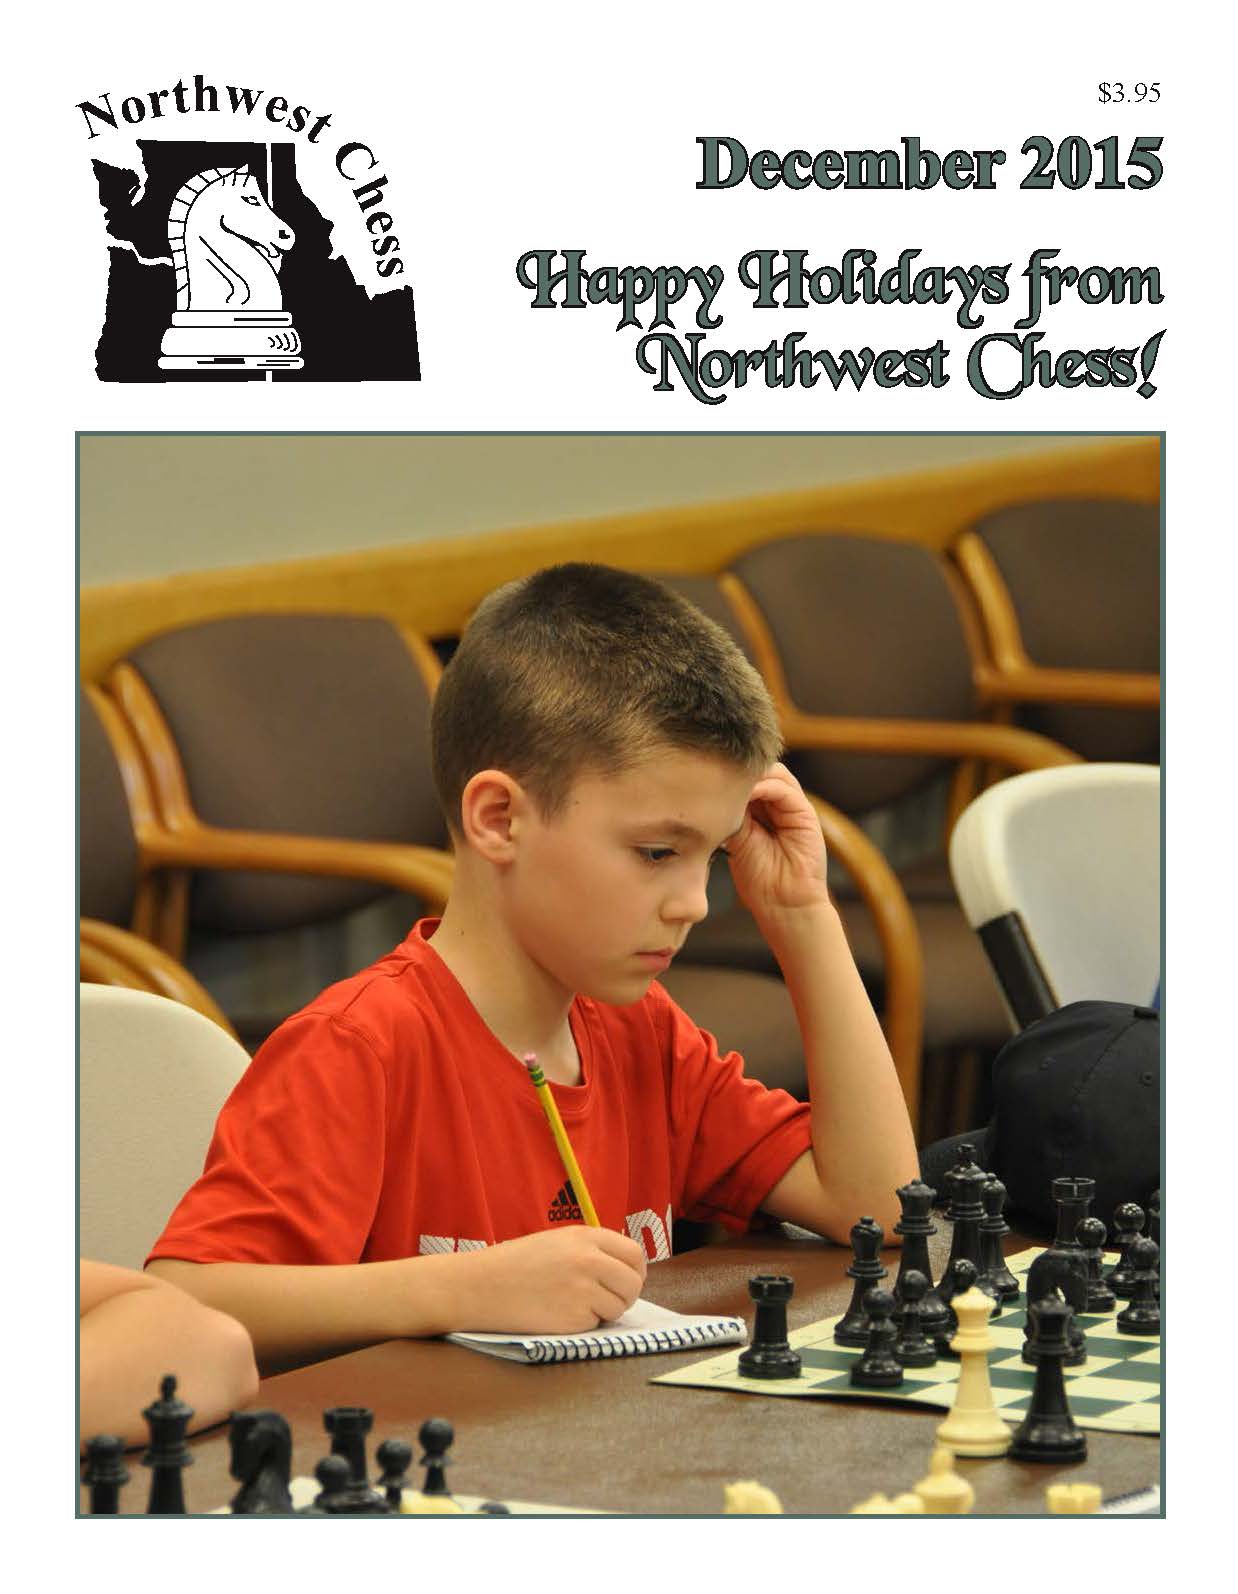 Coquille Chess Club